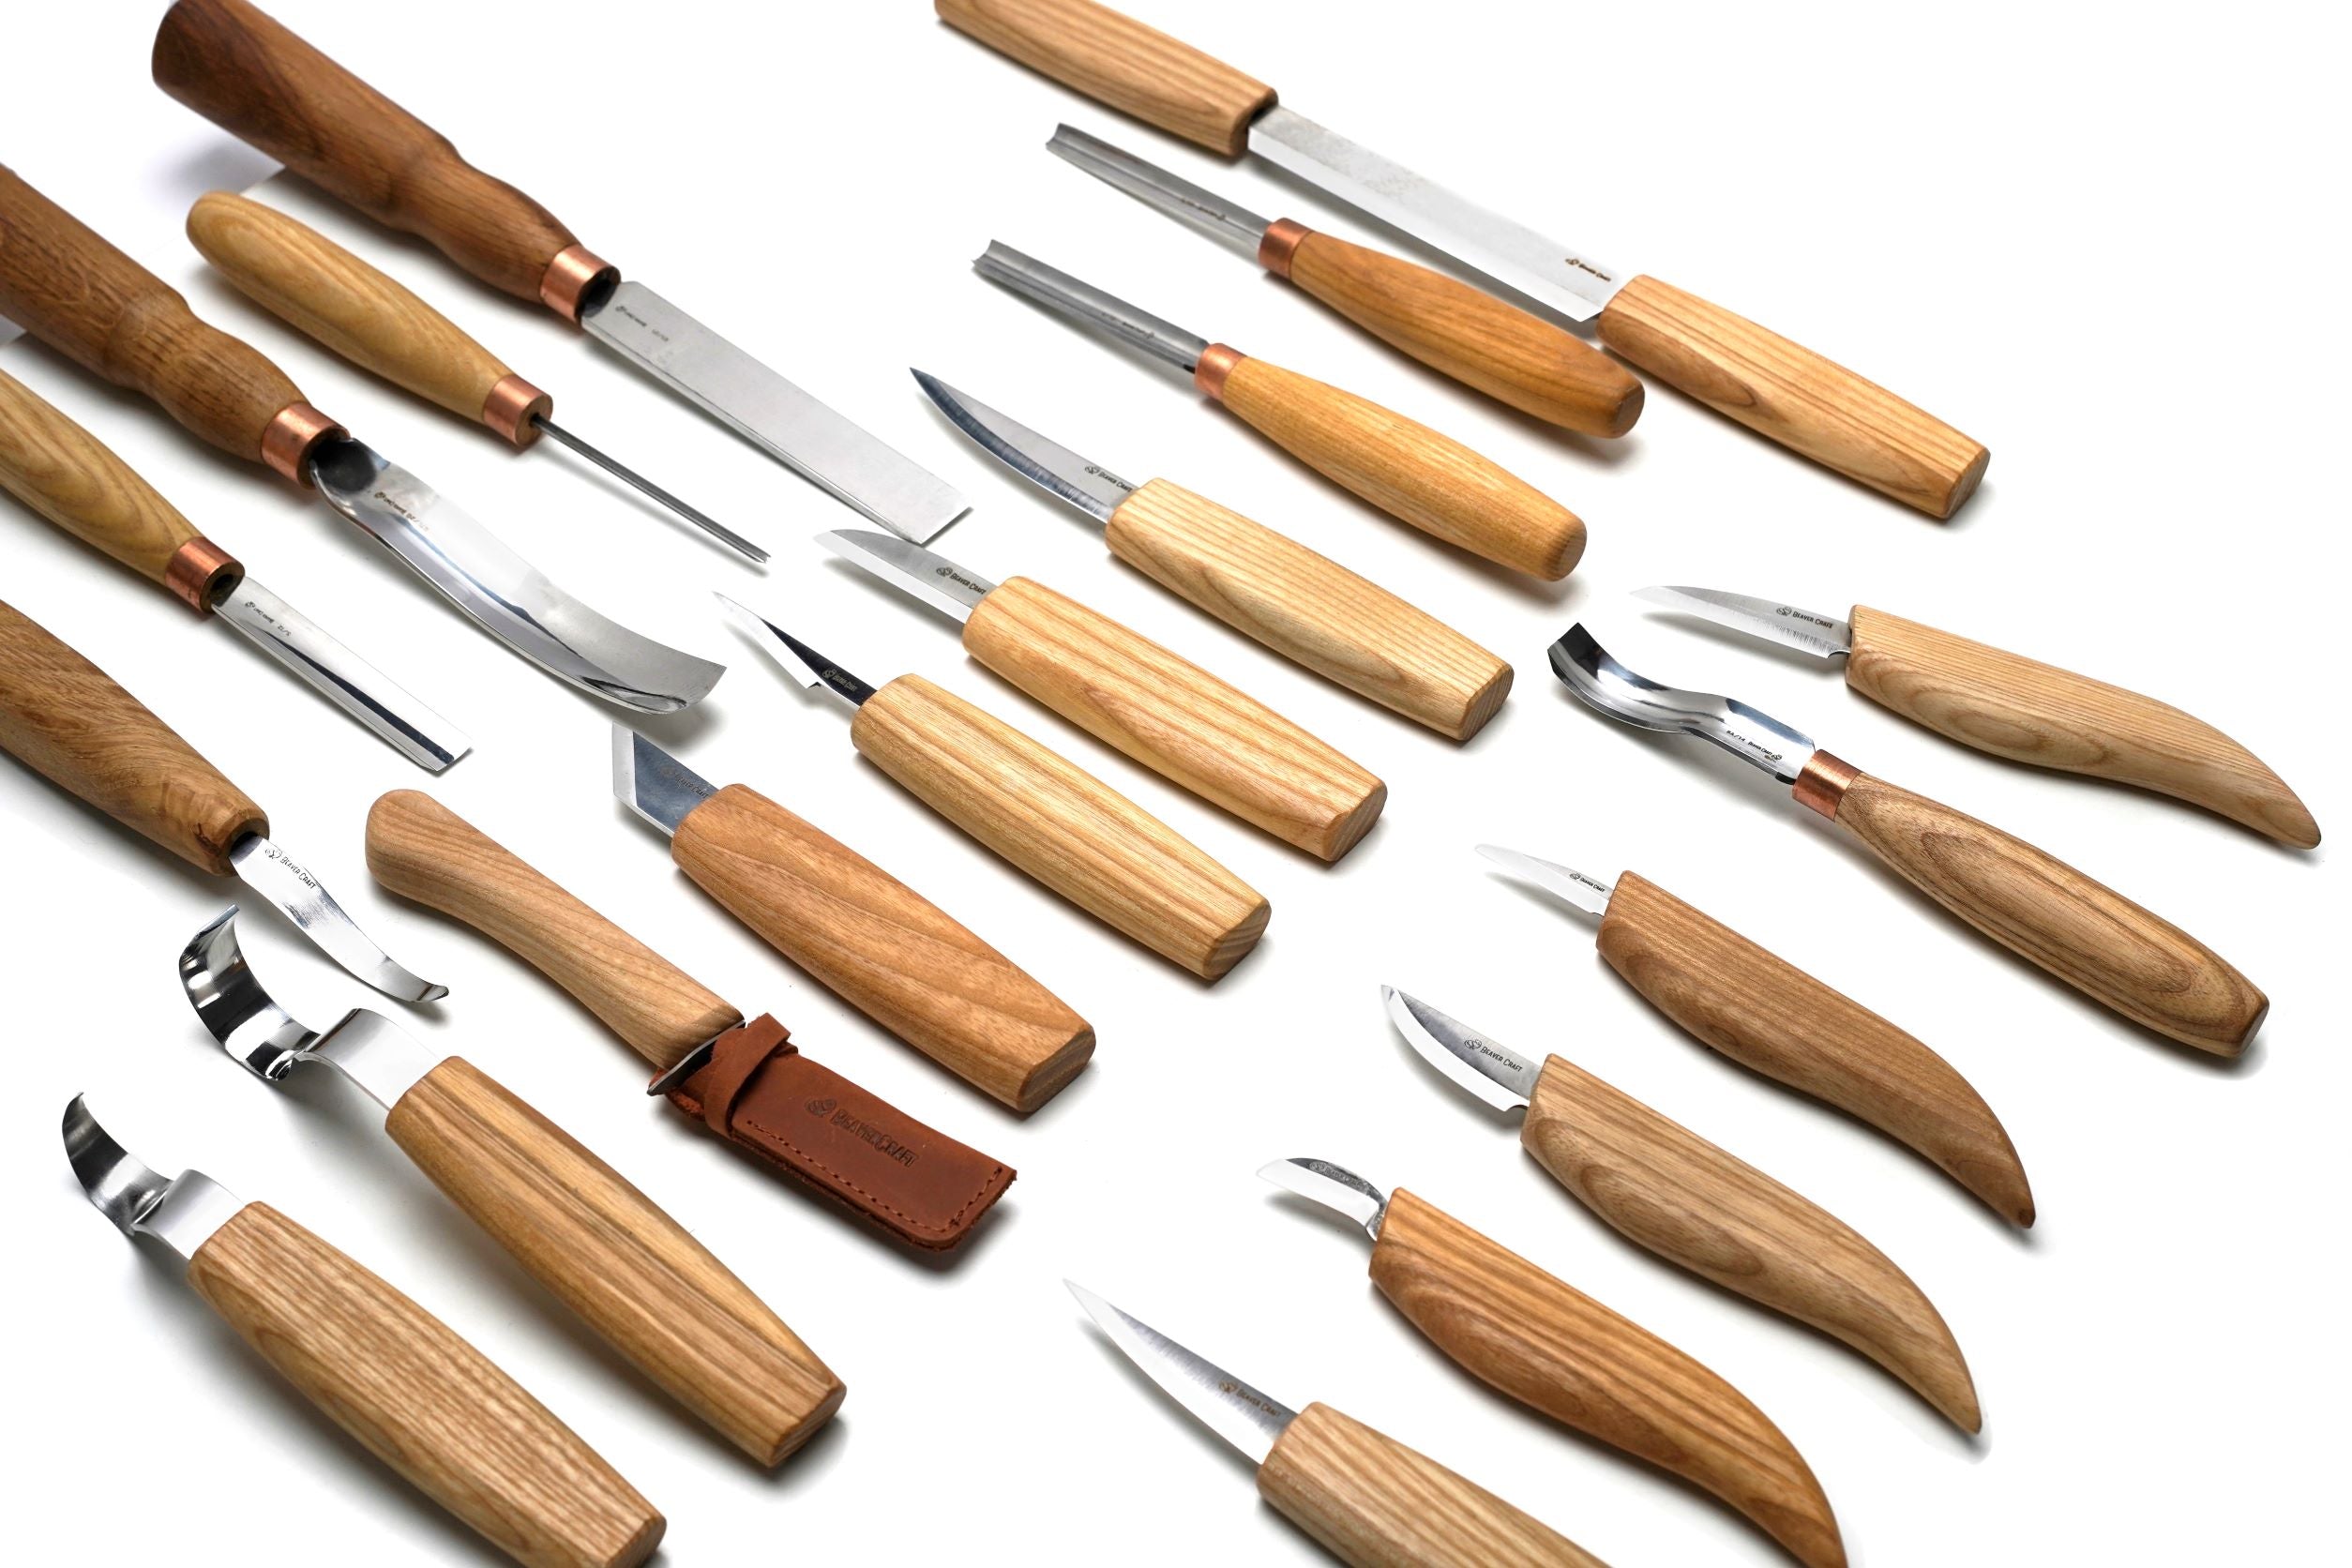 Beginners Guide for Wood Crafting Tools & Methods - Woodford Tooling